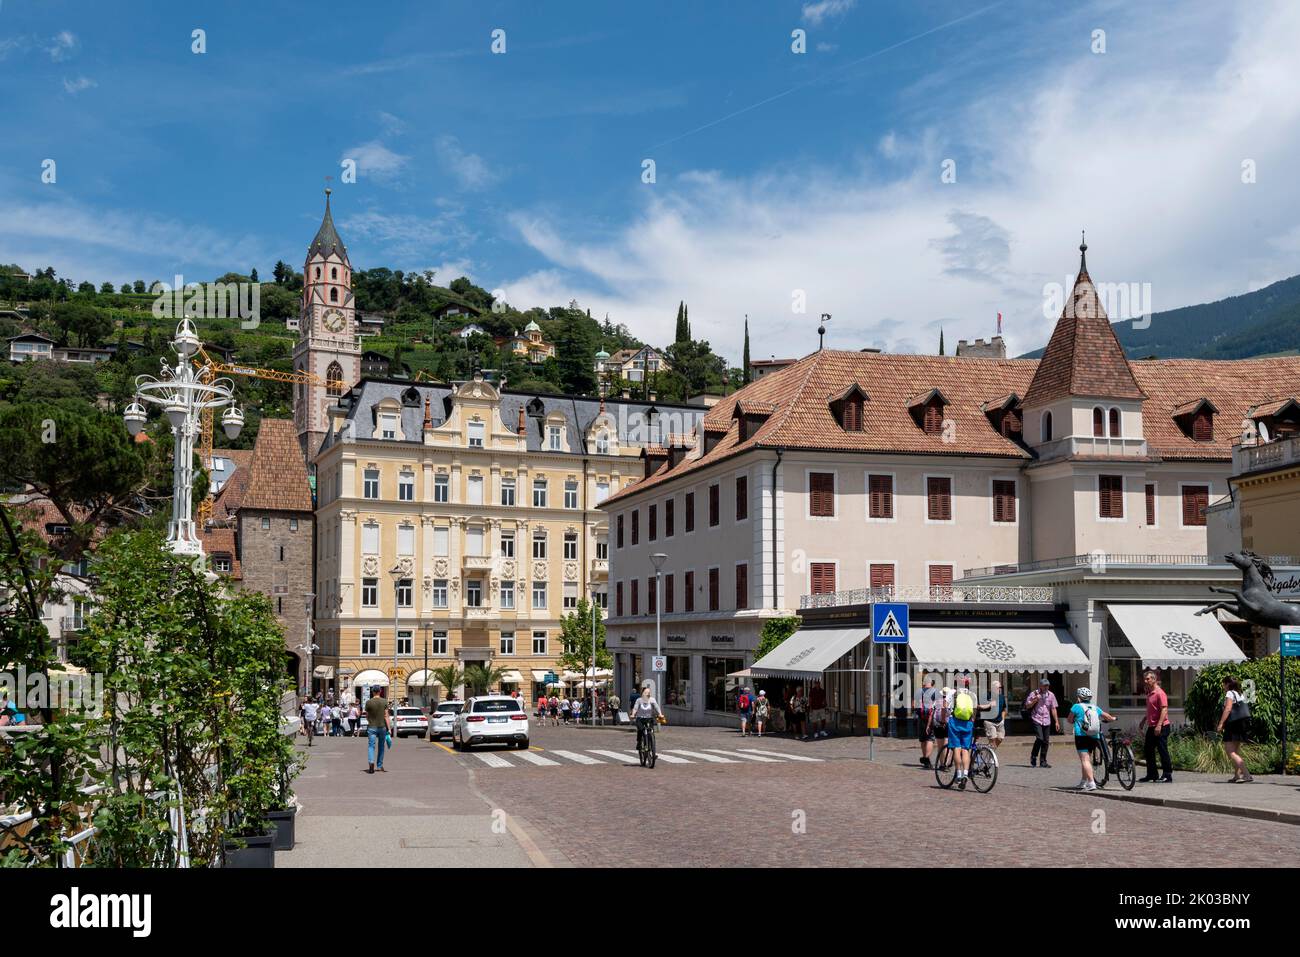 Historic Old Town with Parish Church of St. Nicholas, Merano, South Tyrol, Italy Stock Photo